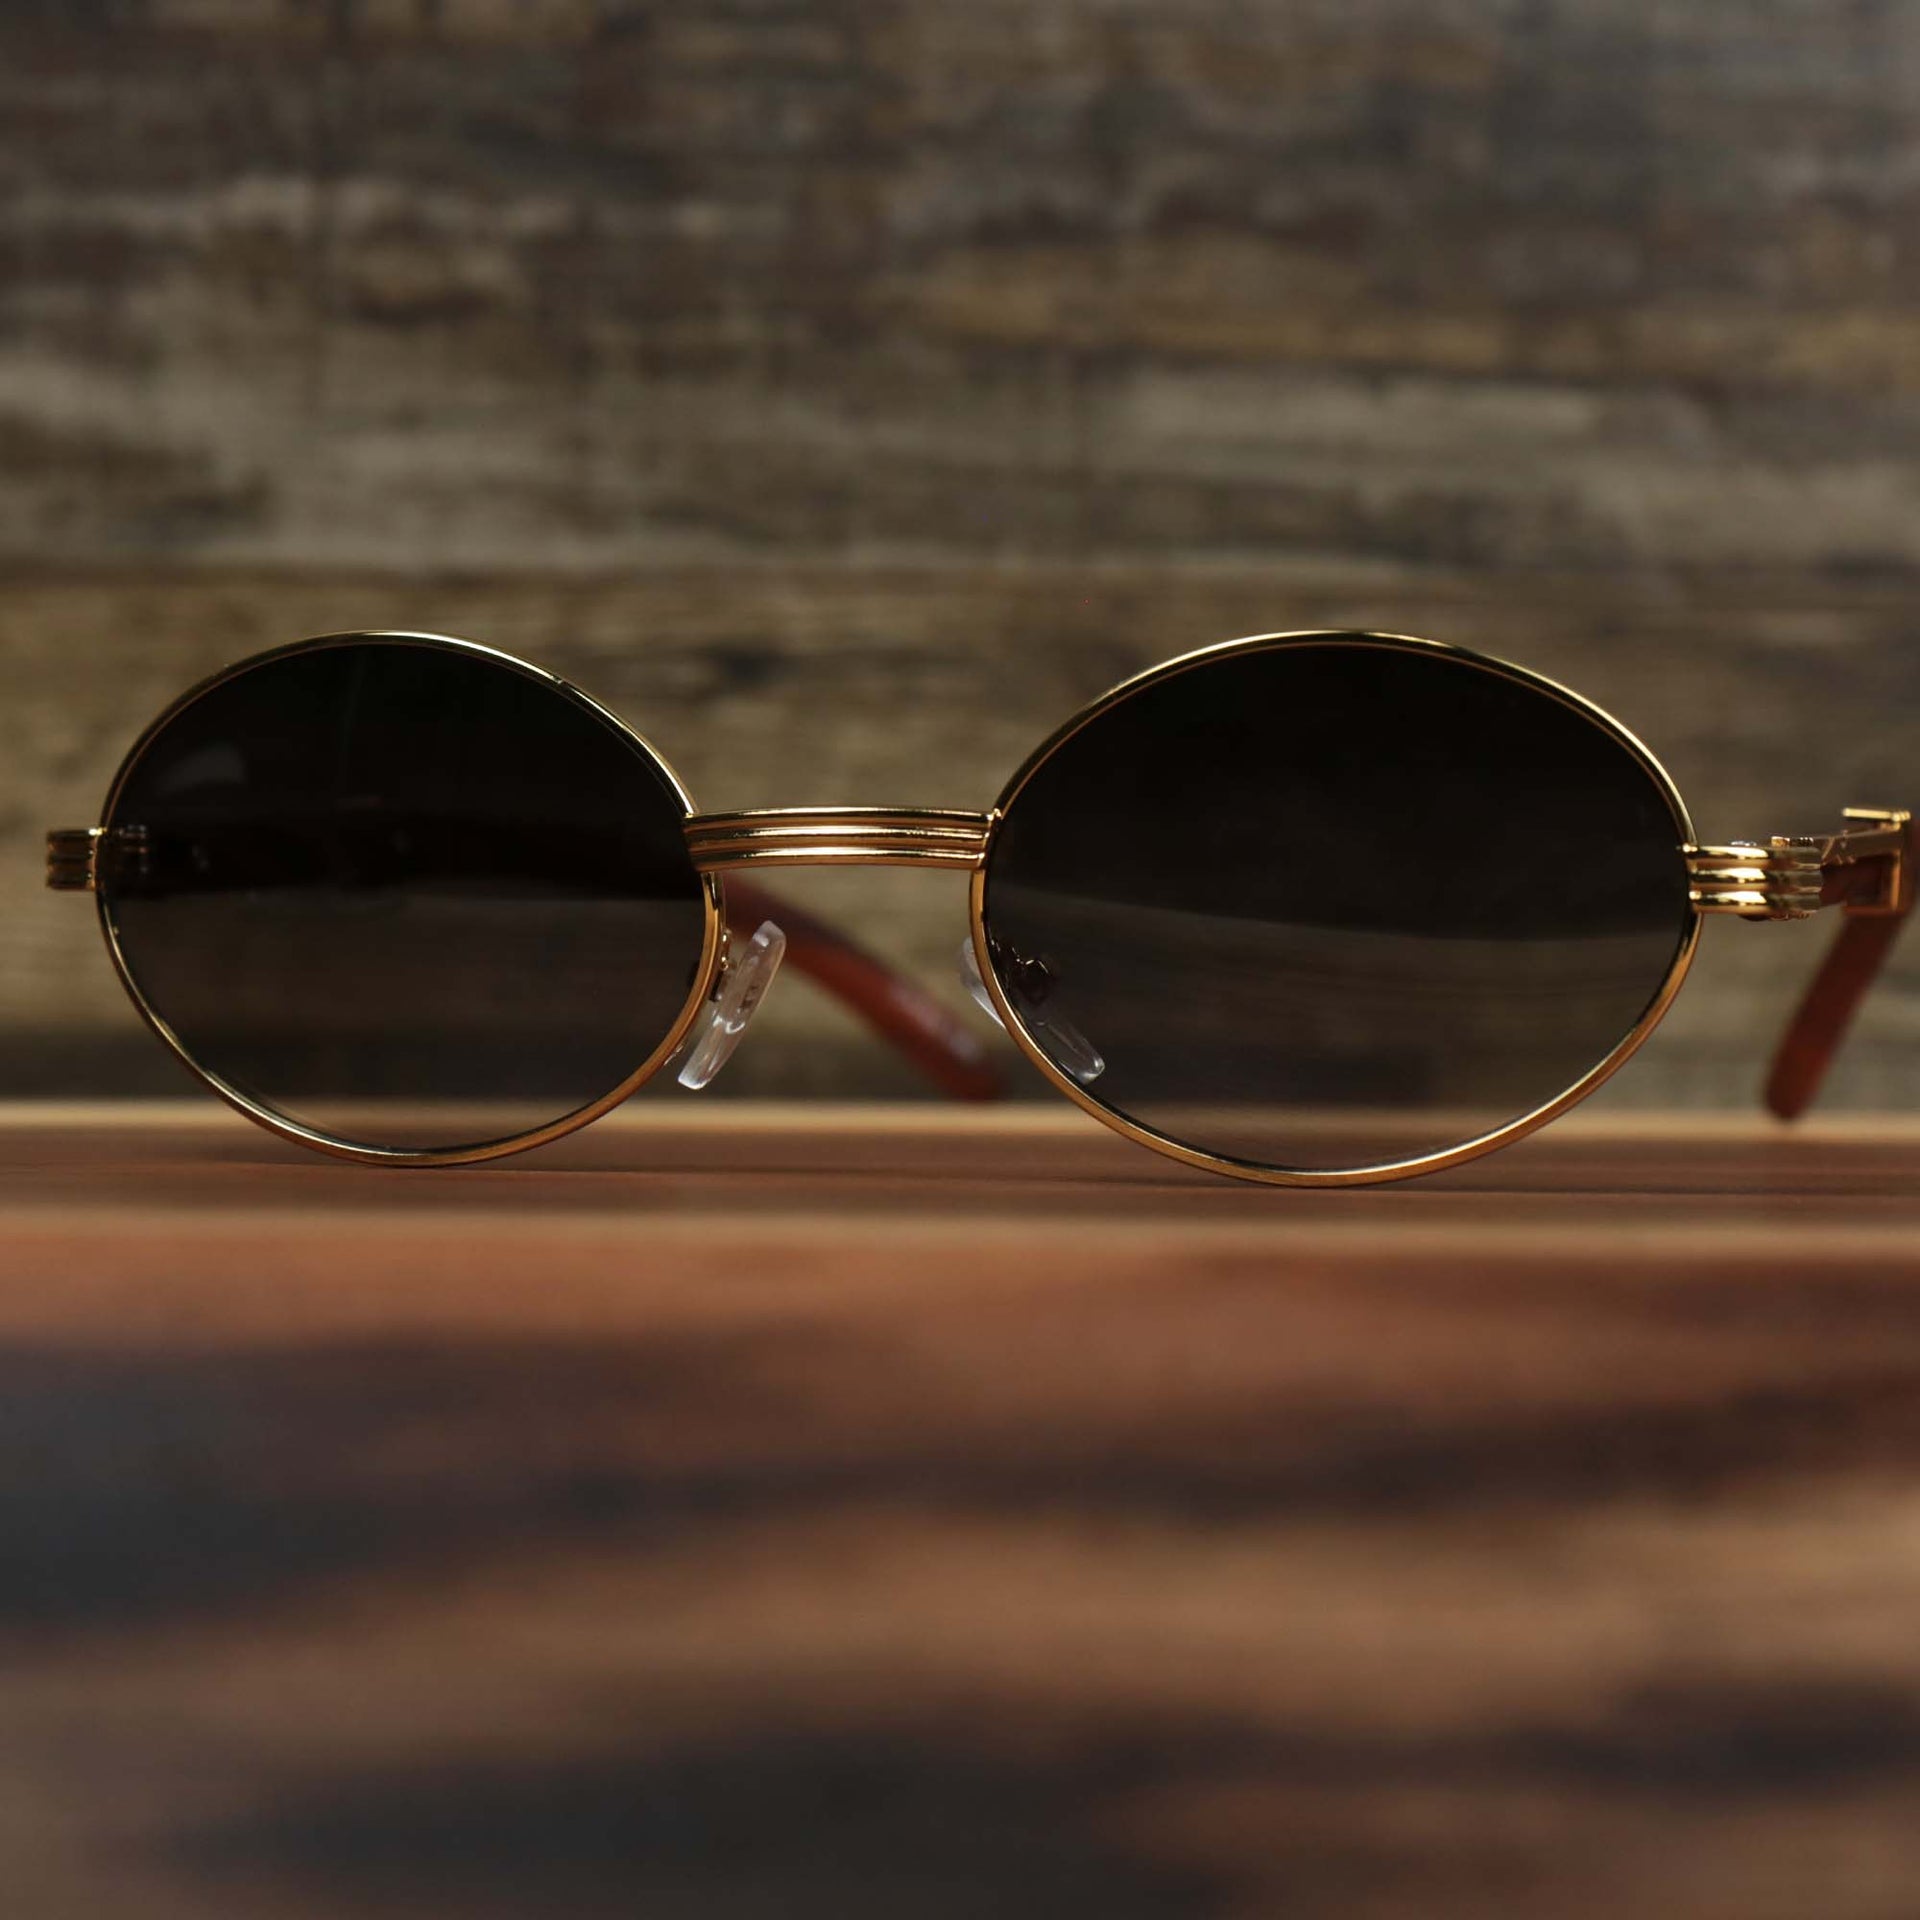 The Oval 3 Row Frame Black Lens Sunglasses with Gold Frame